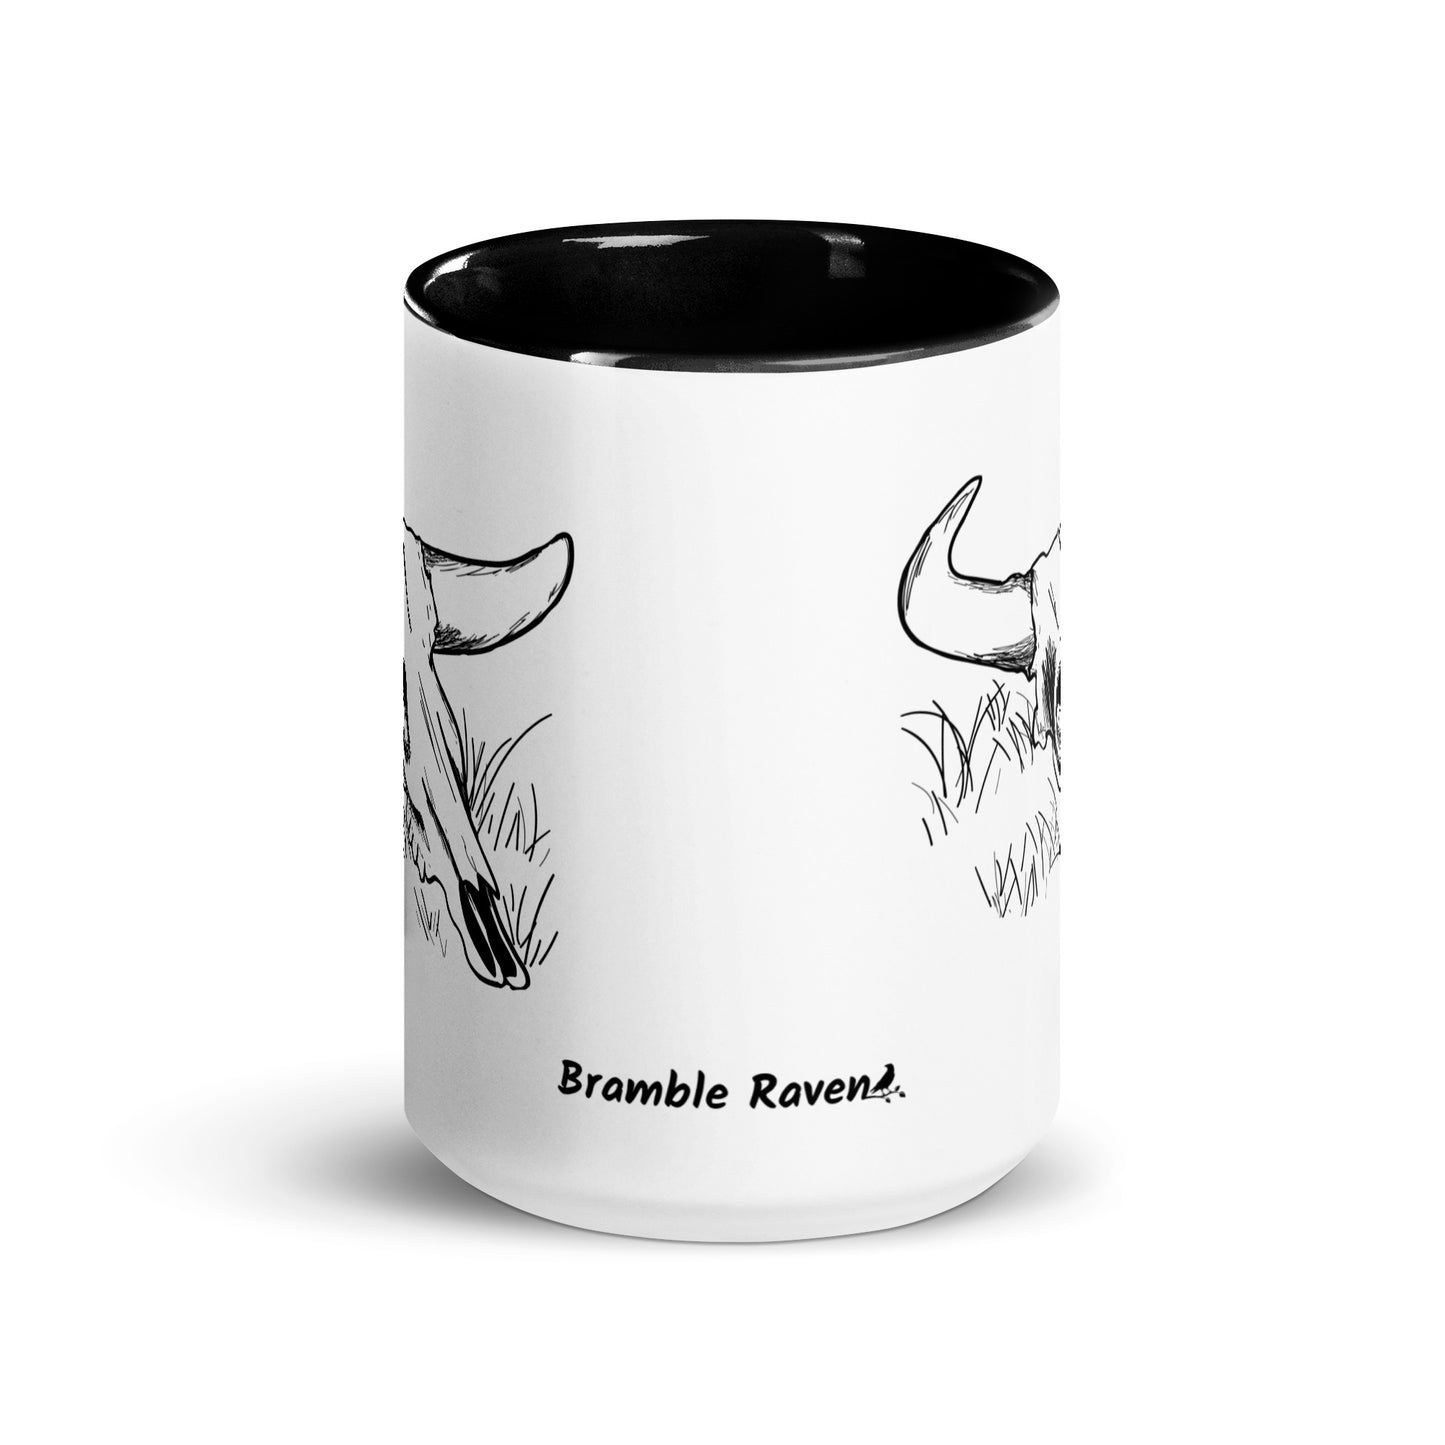 15 ounce ceramic mug. White with black handle and inside. Features double sided image of a cow skull cradling a bird nest. Front view.